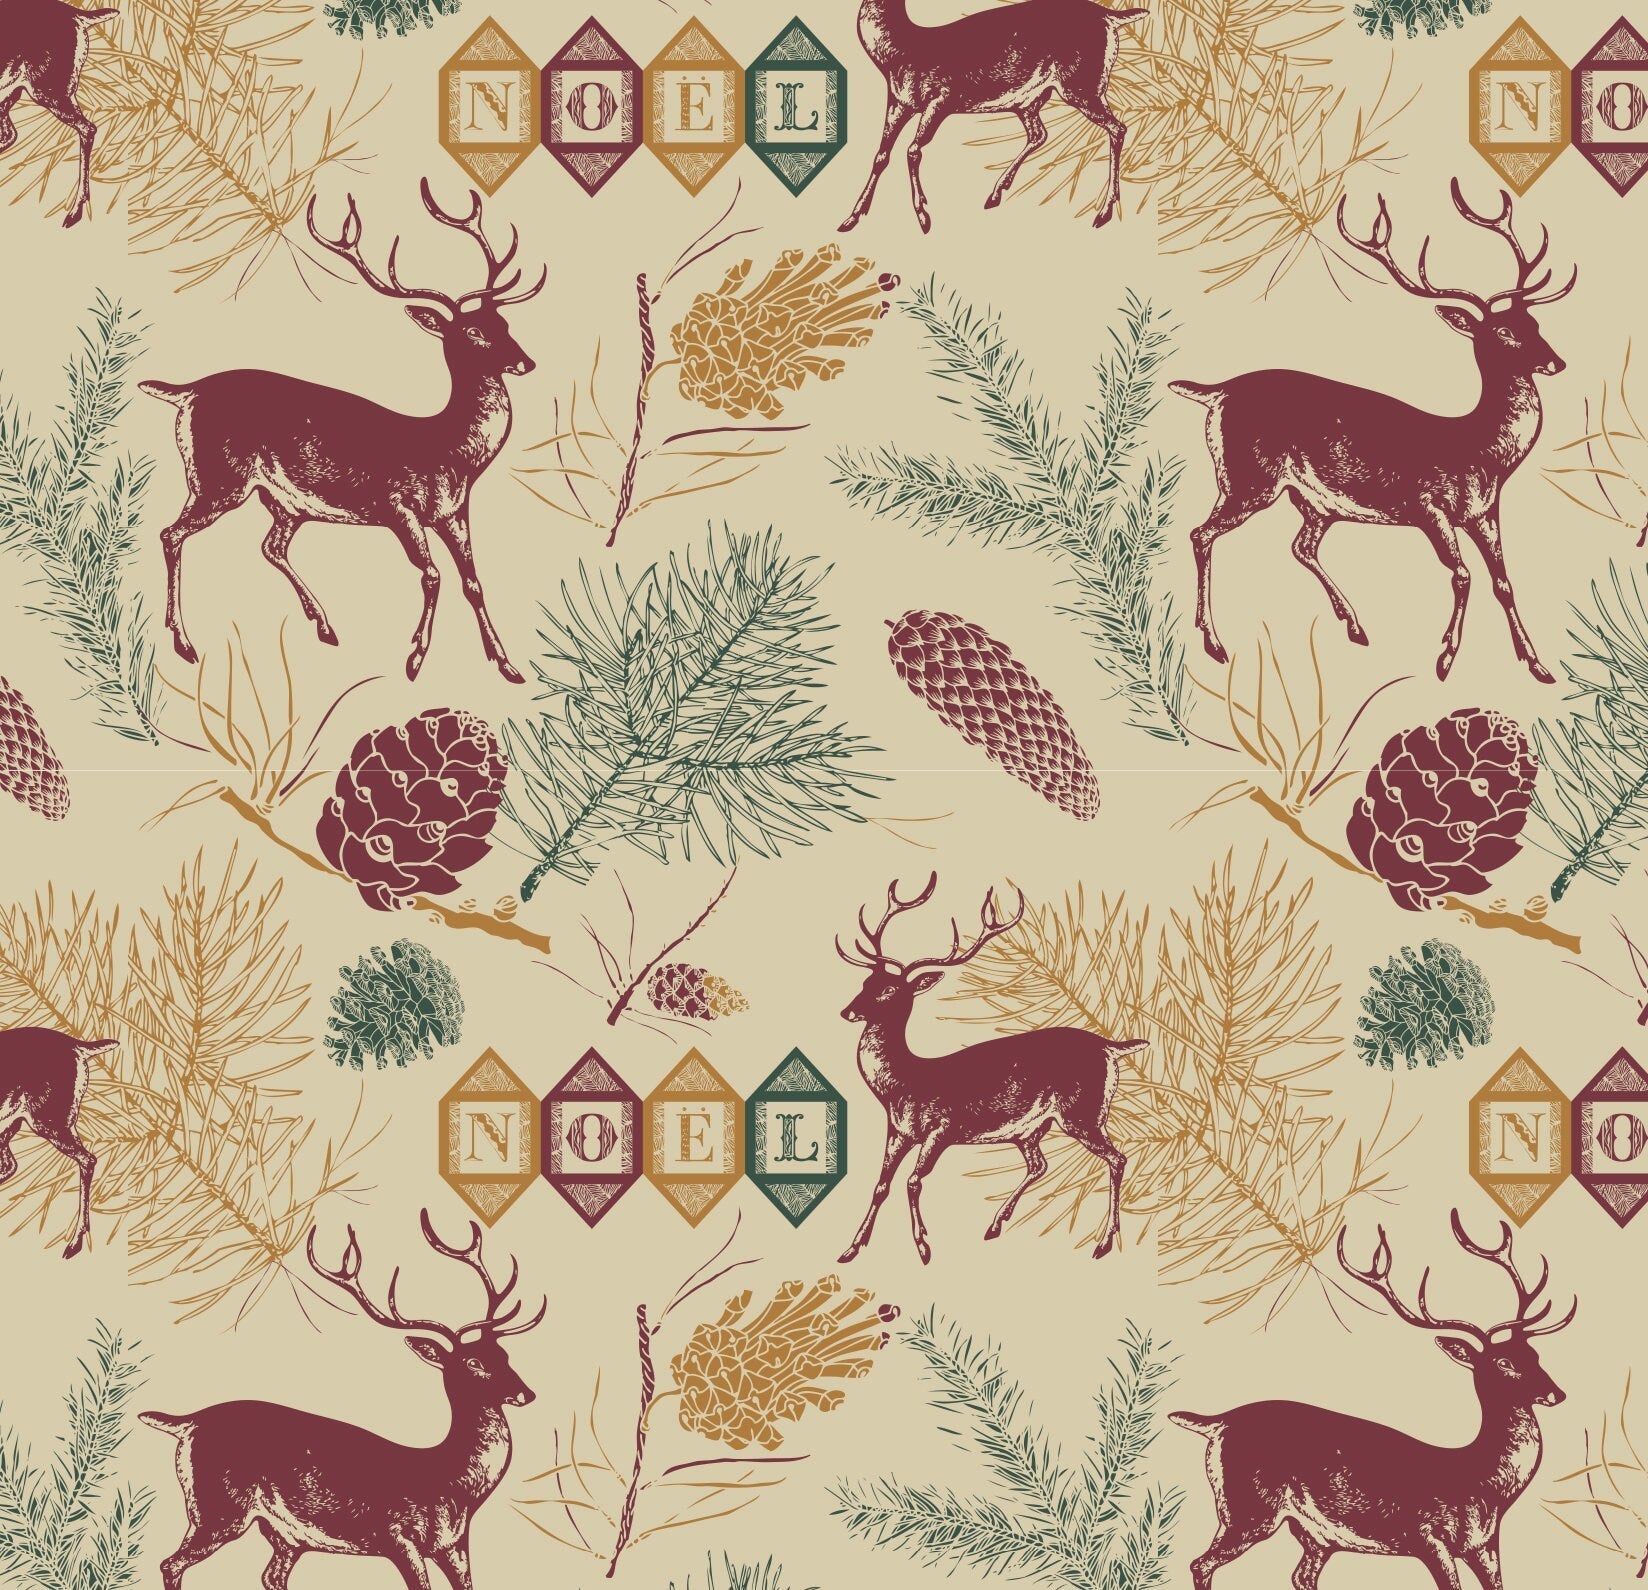 Deer Christmas Wrapping Paper - Stesha Party